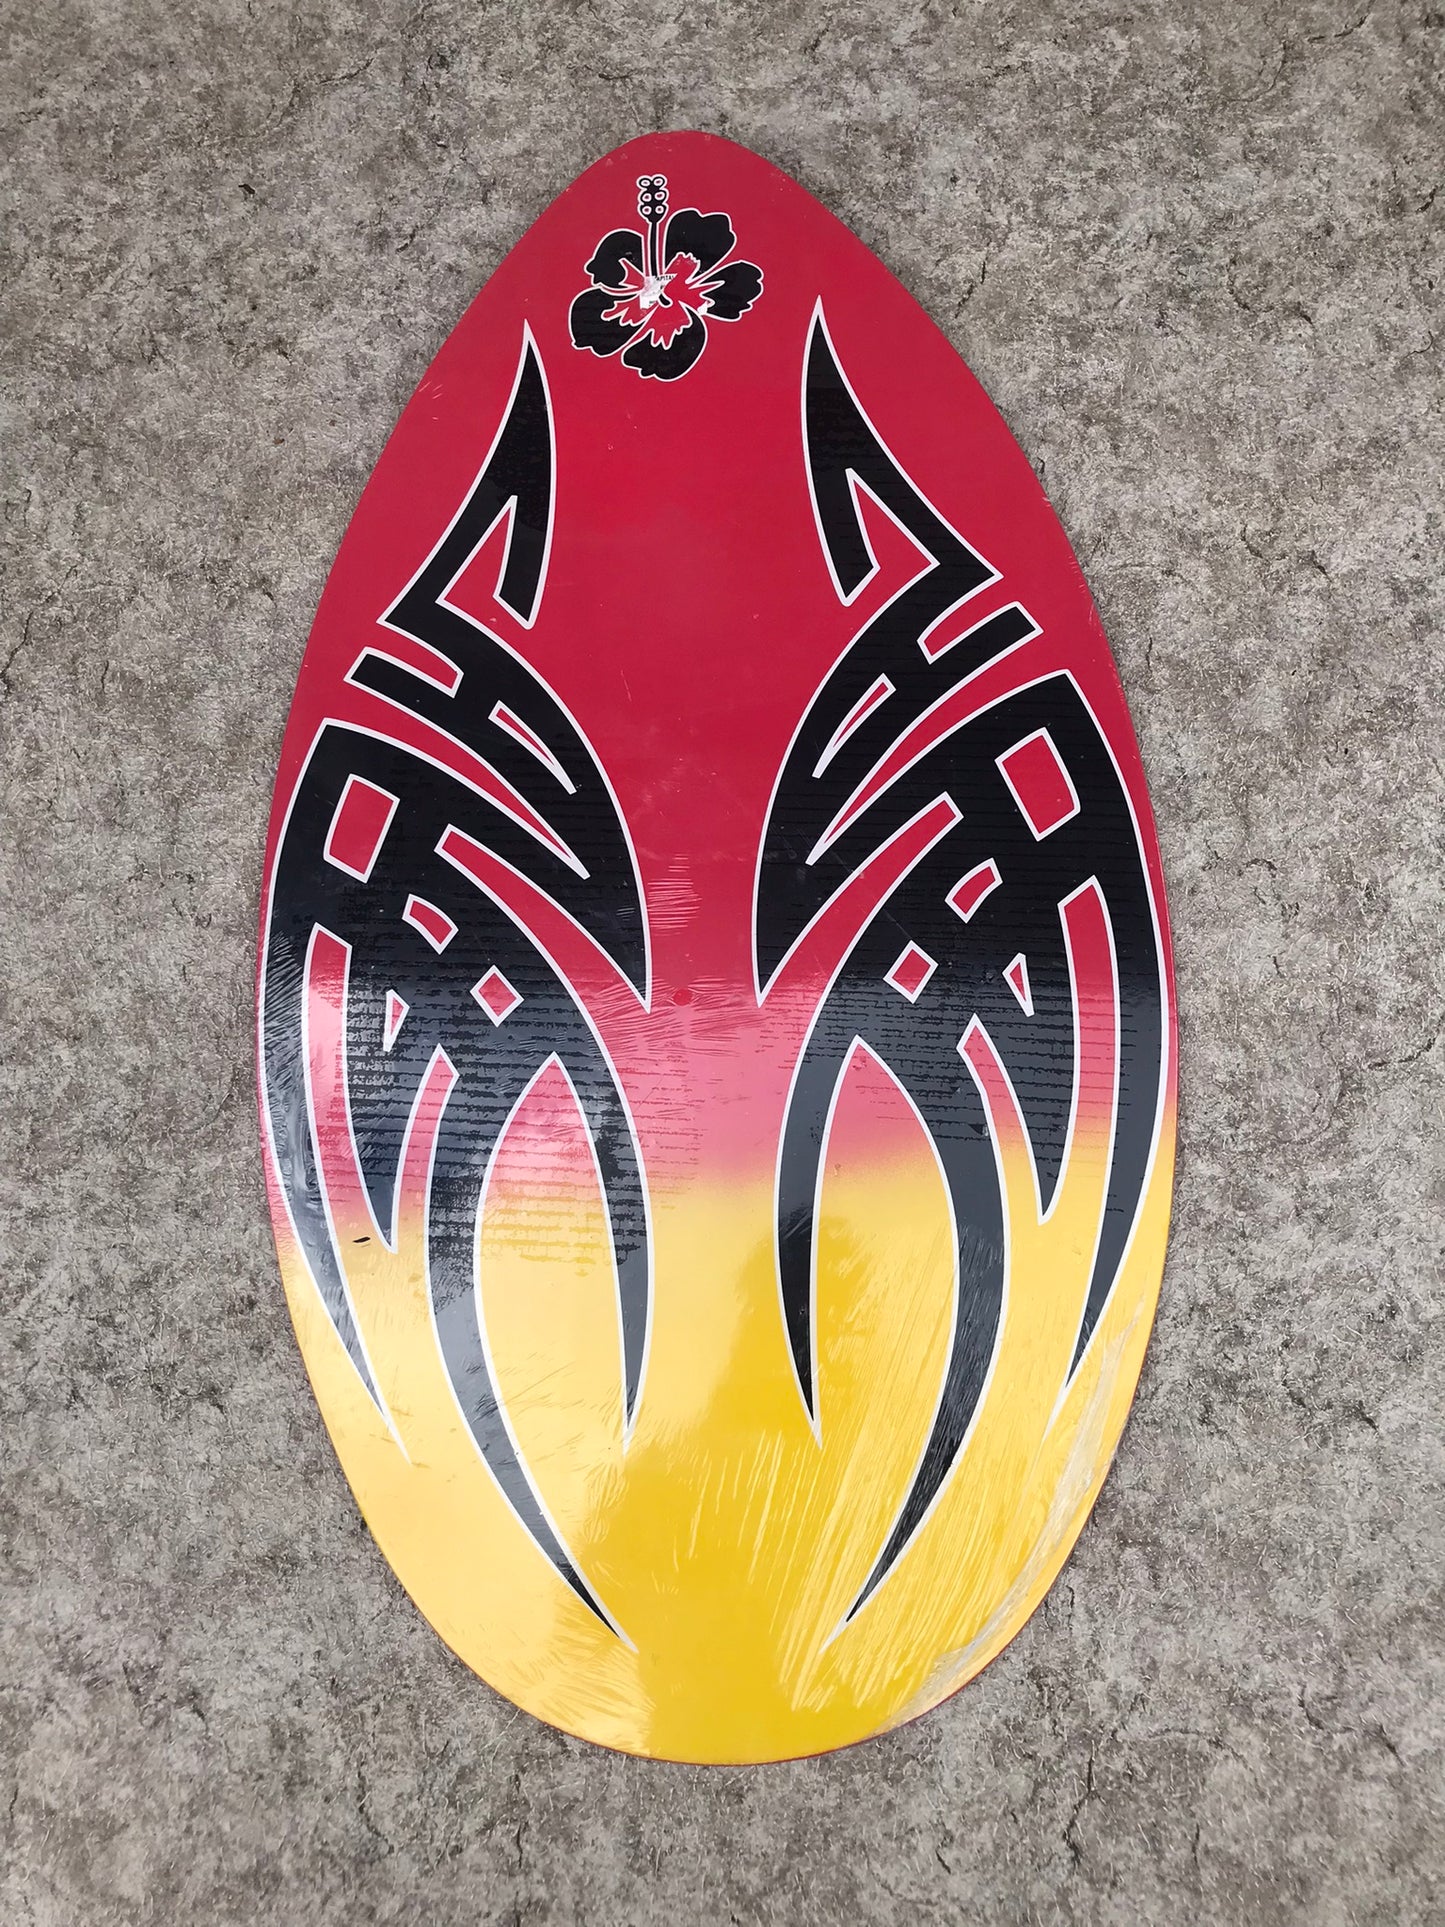 Surf SkimBoard Wood  Red Black Yellow  New Sealed  35 x 20 inch